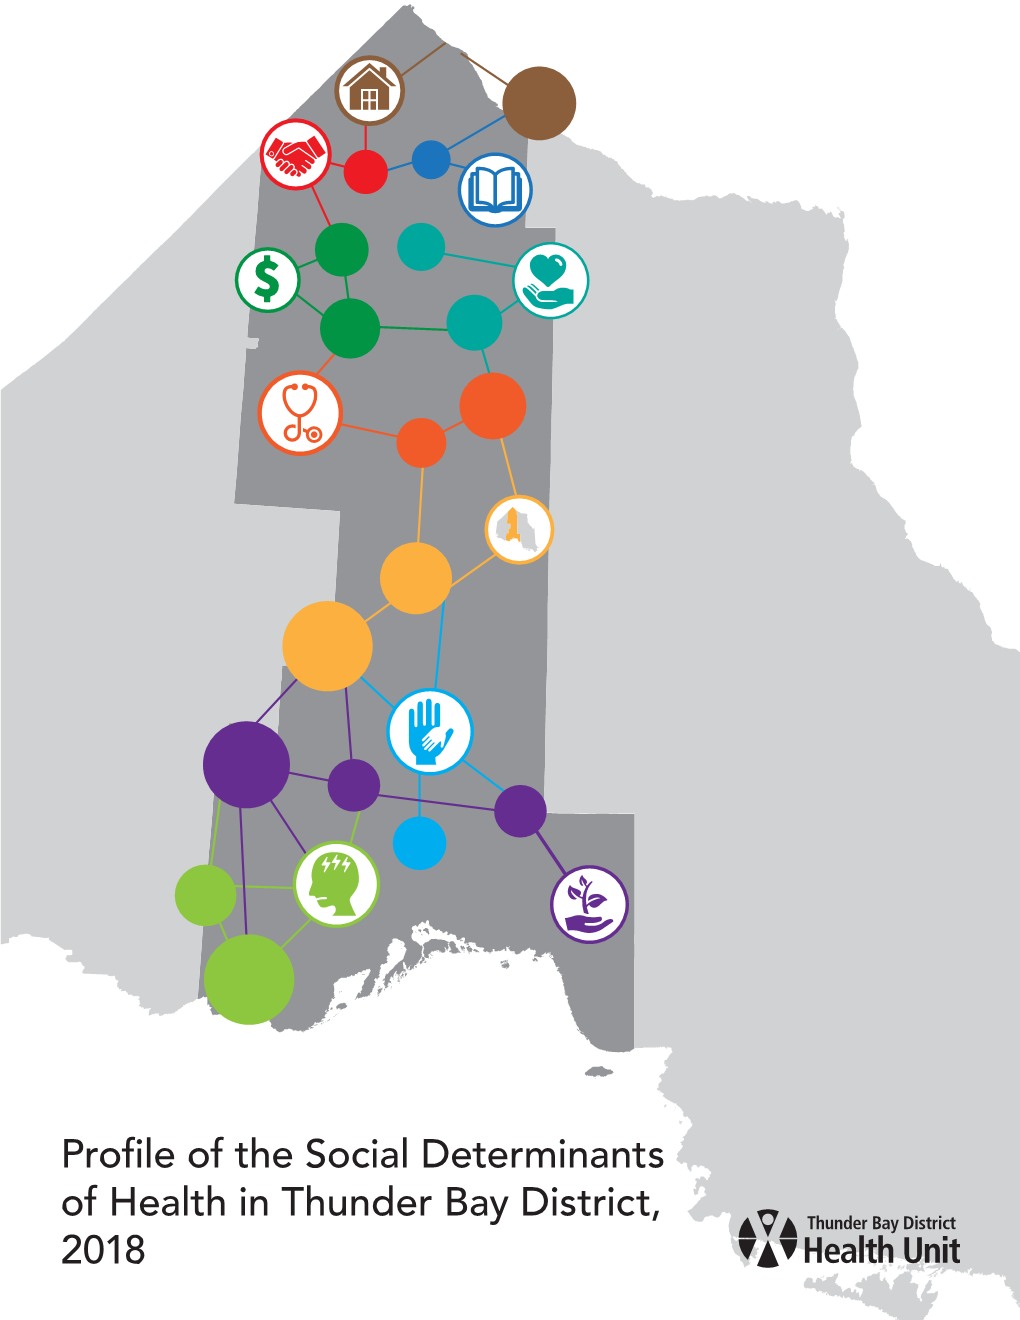 Profile of the Social Determinants in Thunder Bay District, 2018